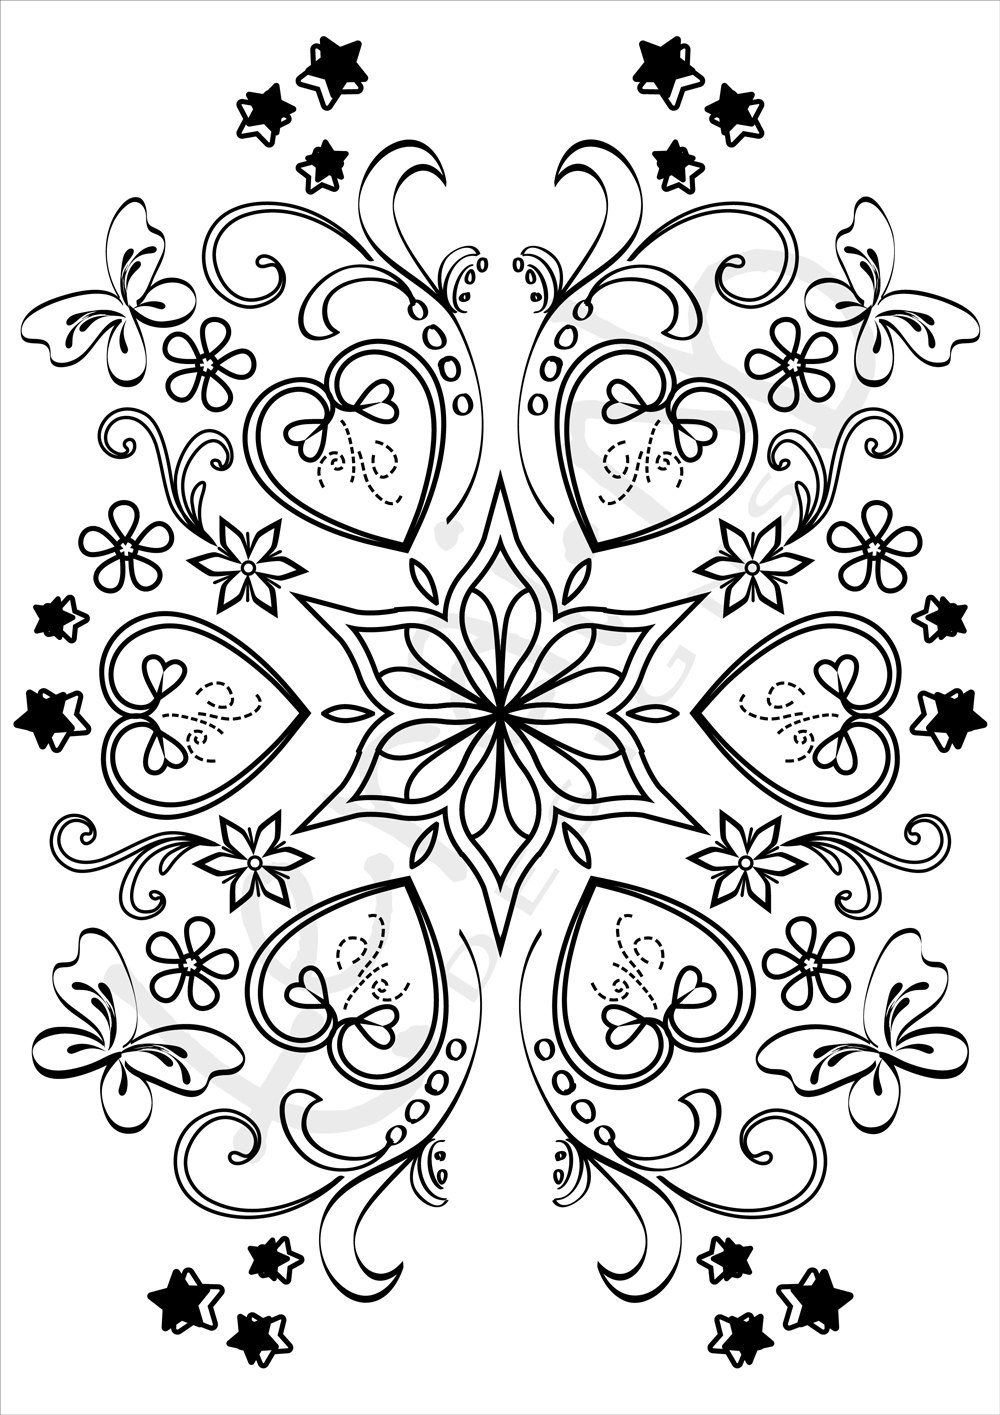 Adult Coloring Pages Hearts
 Hearts Colouring page Adult Doodle Art Valentine Colouring